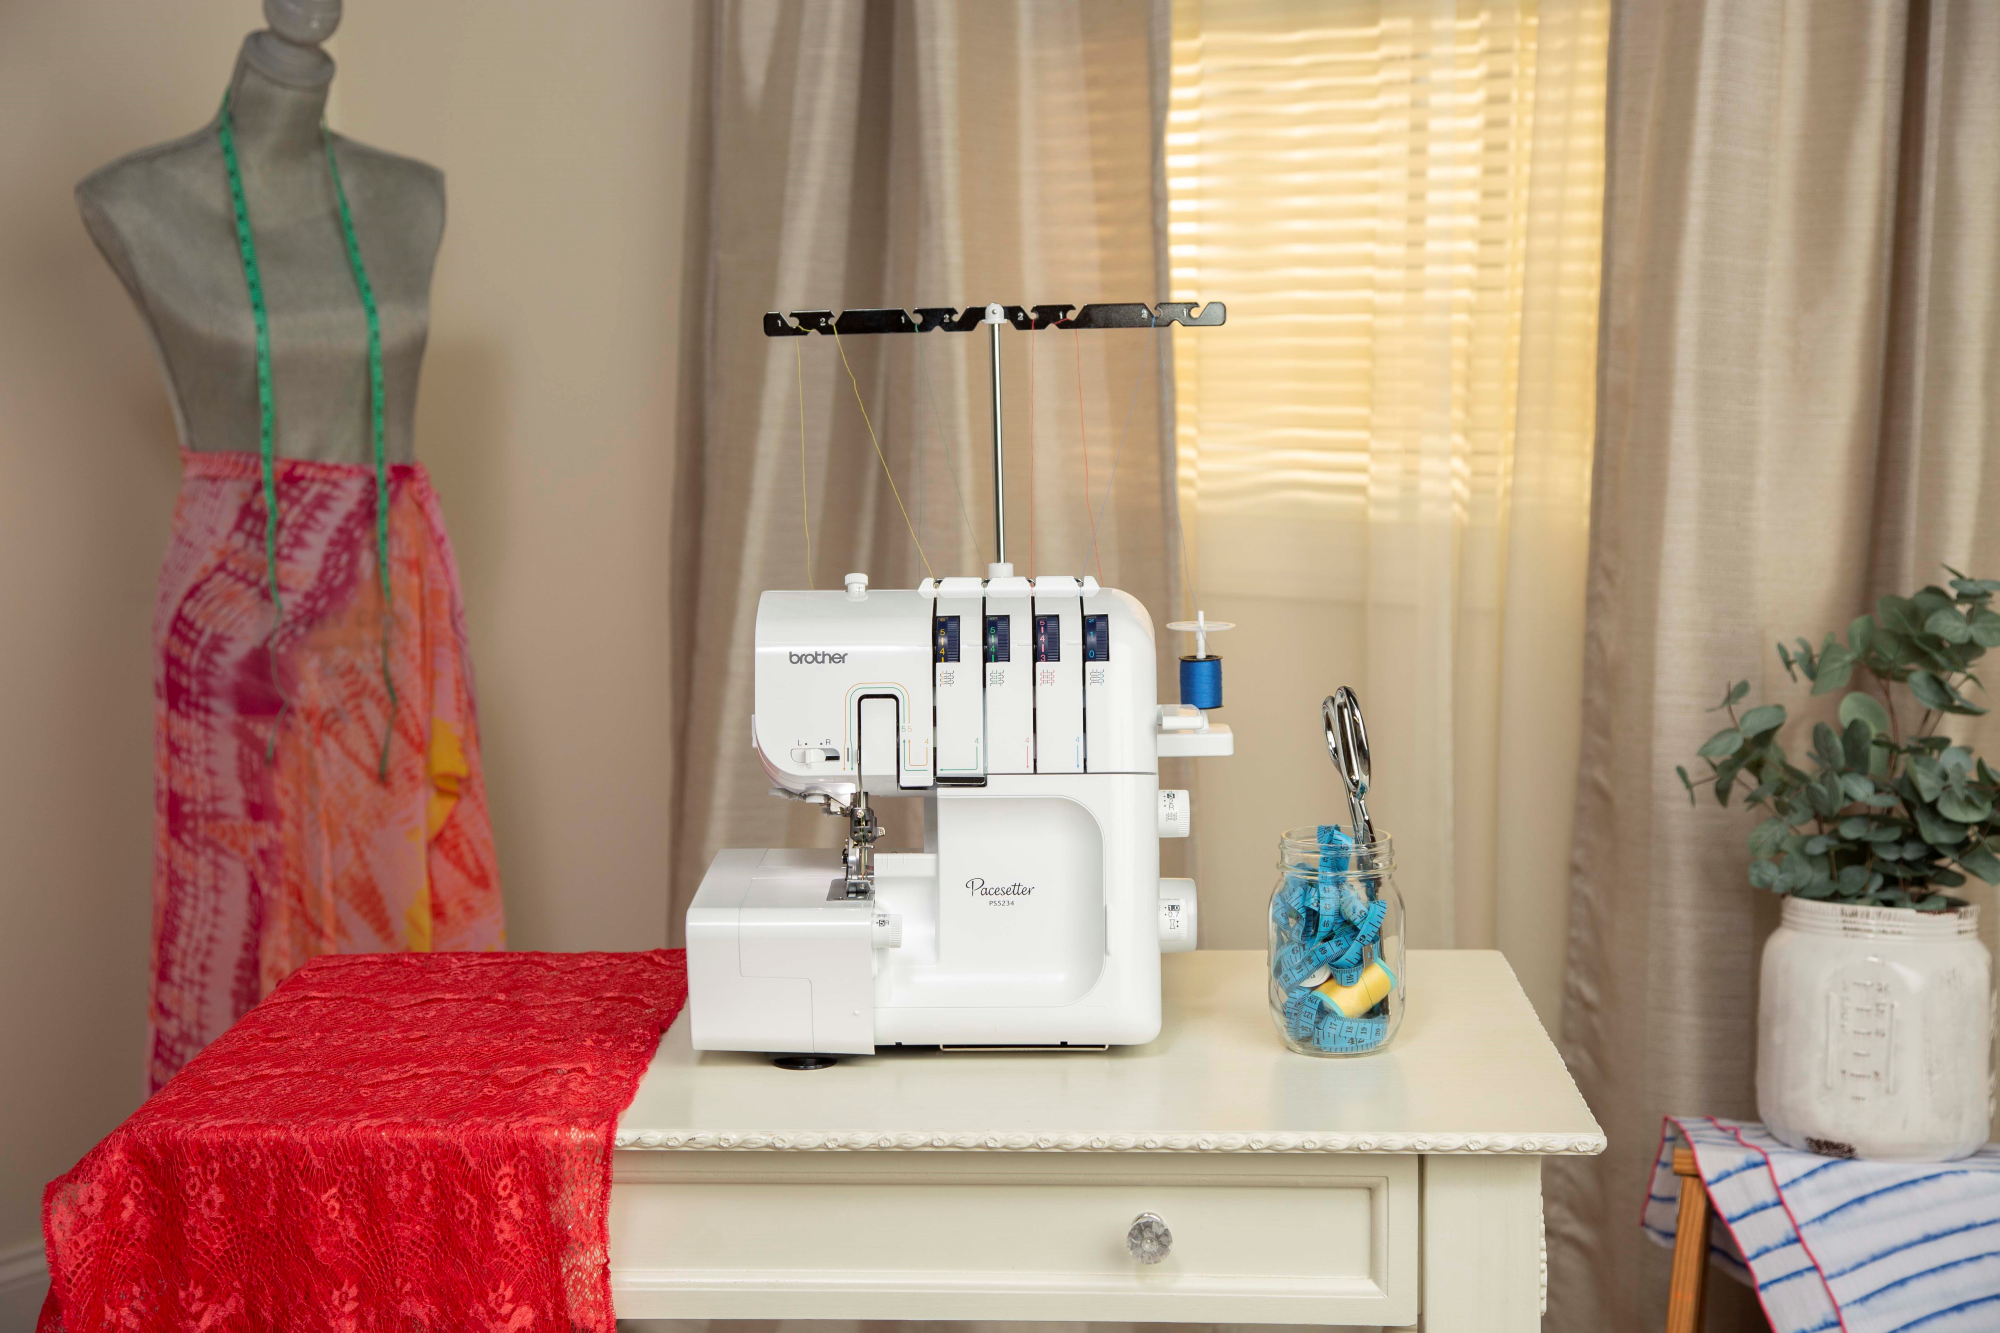 image of the Brother R Pacesetter PS5234 Serger Sewing Machine on a table with sewing supplies